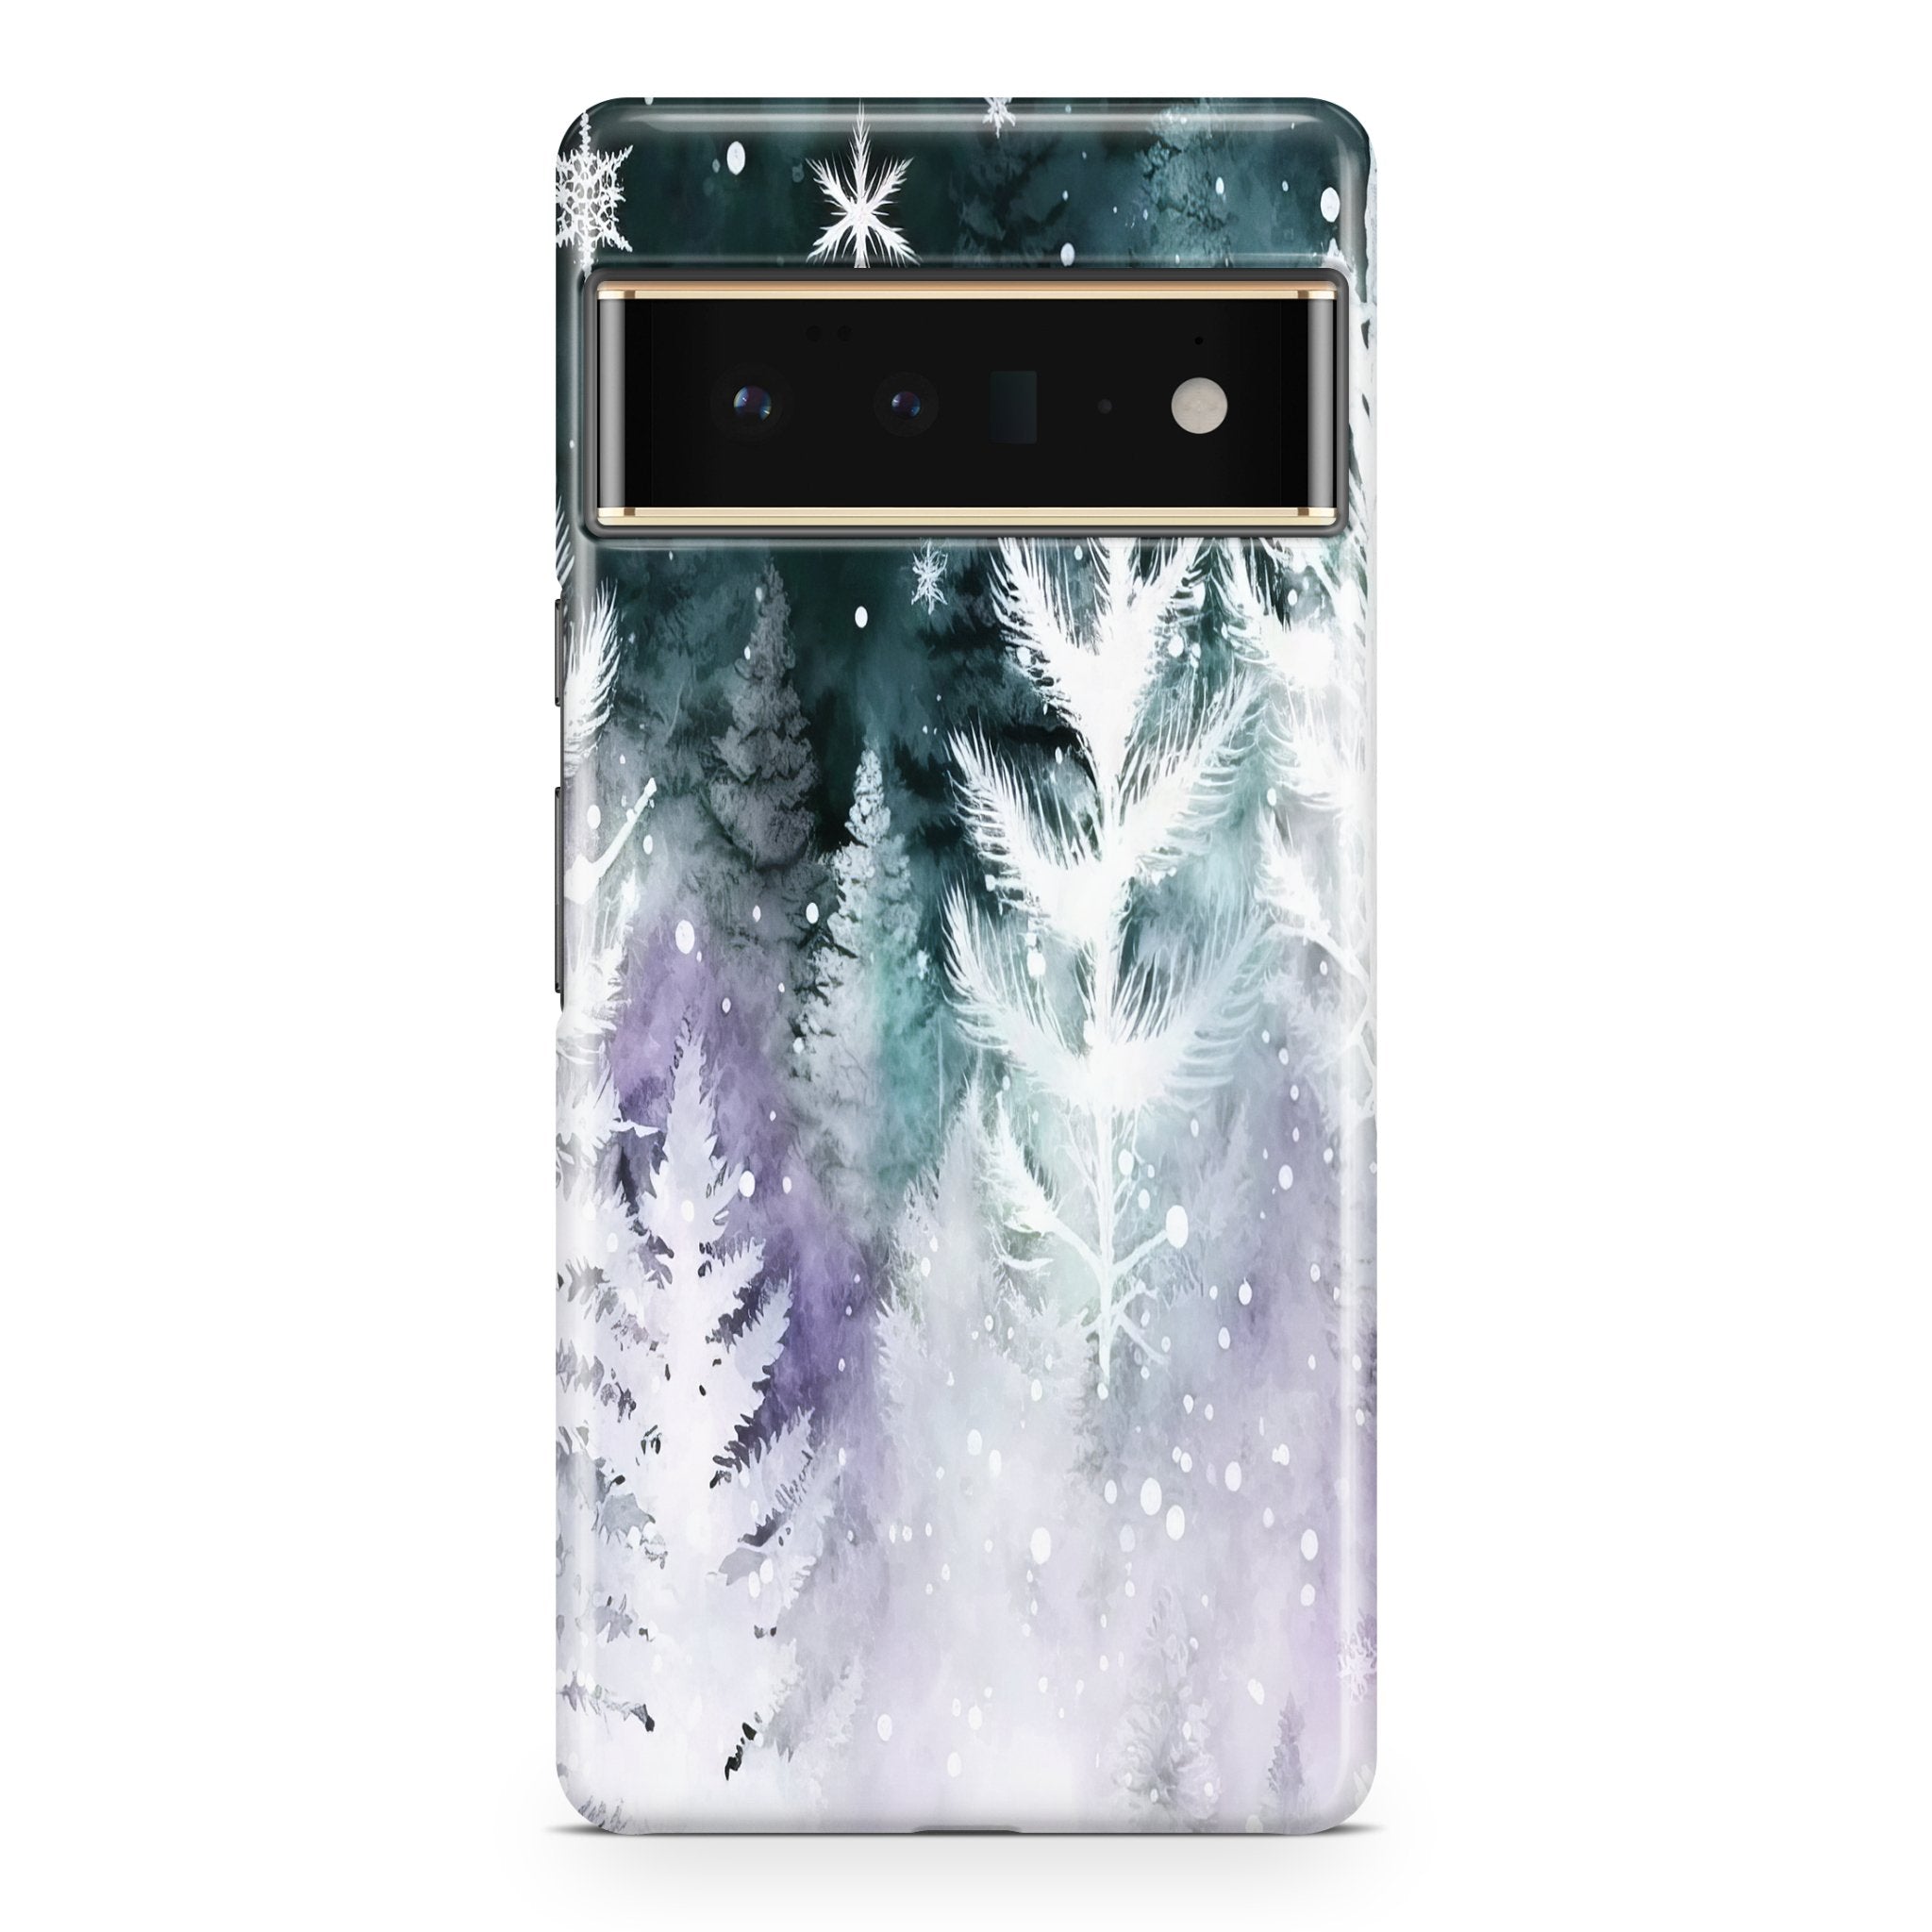 Winter Midnight - Google phone case designs by CaseSwagger